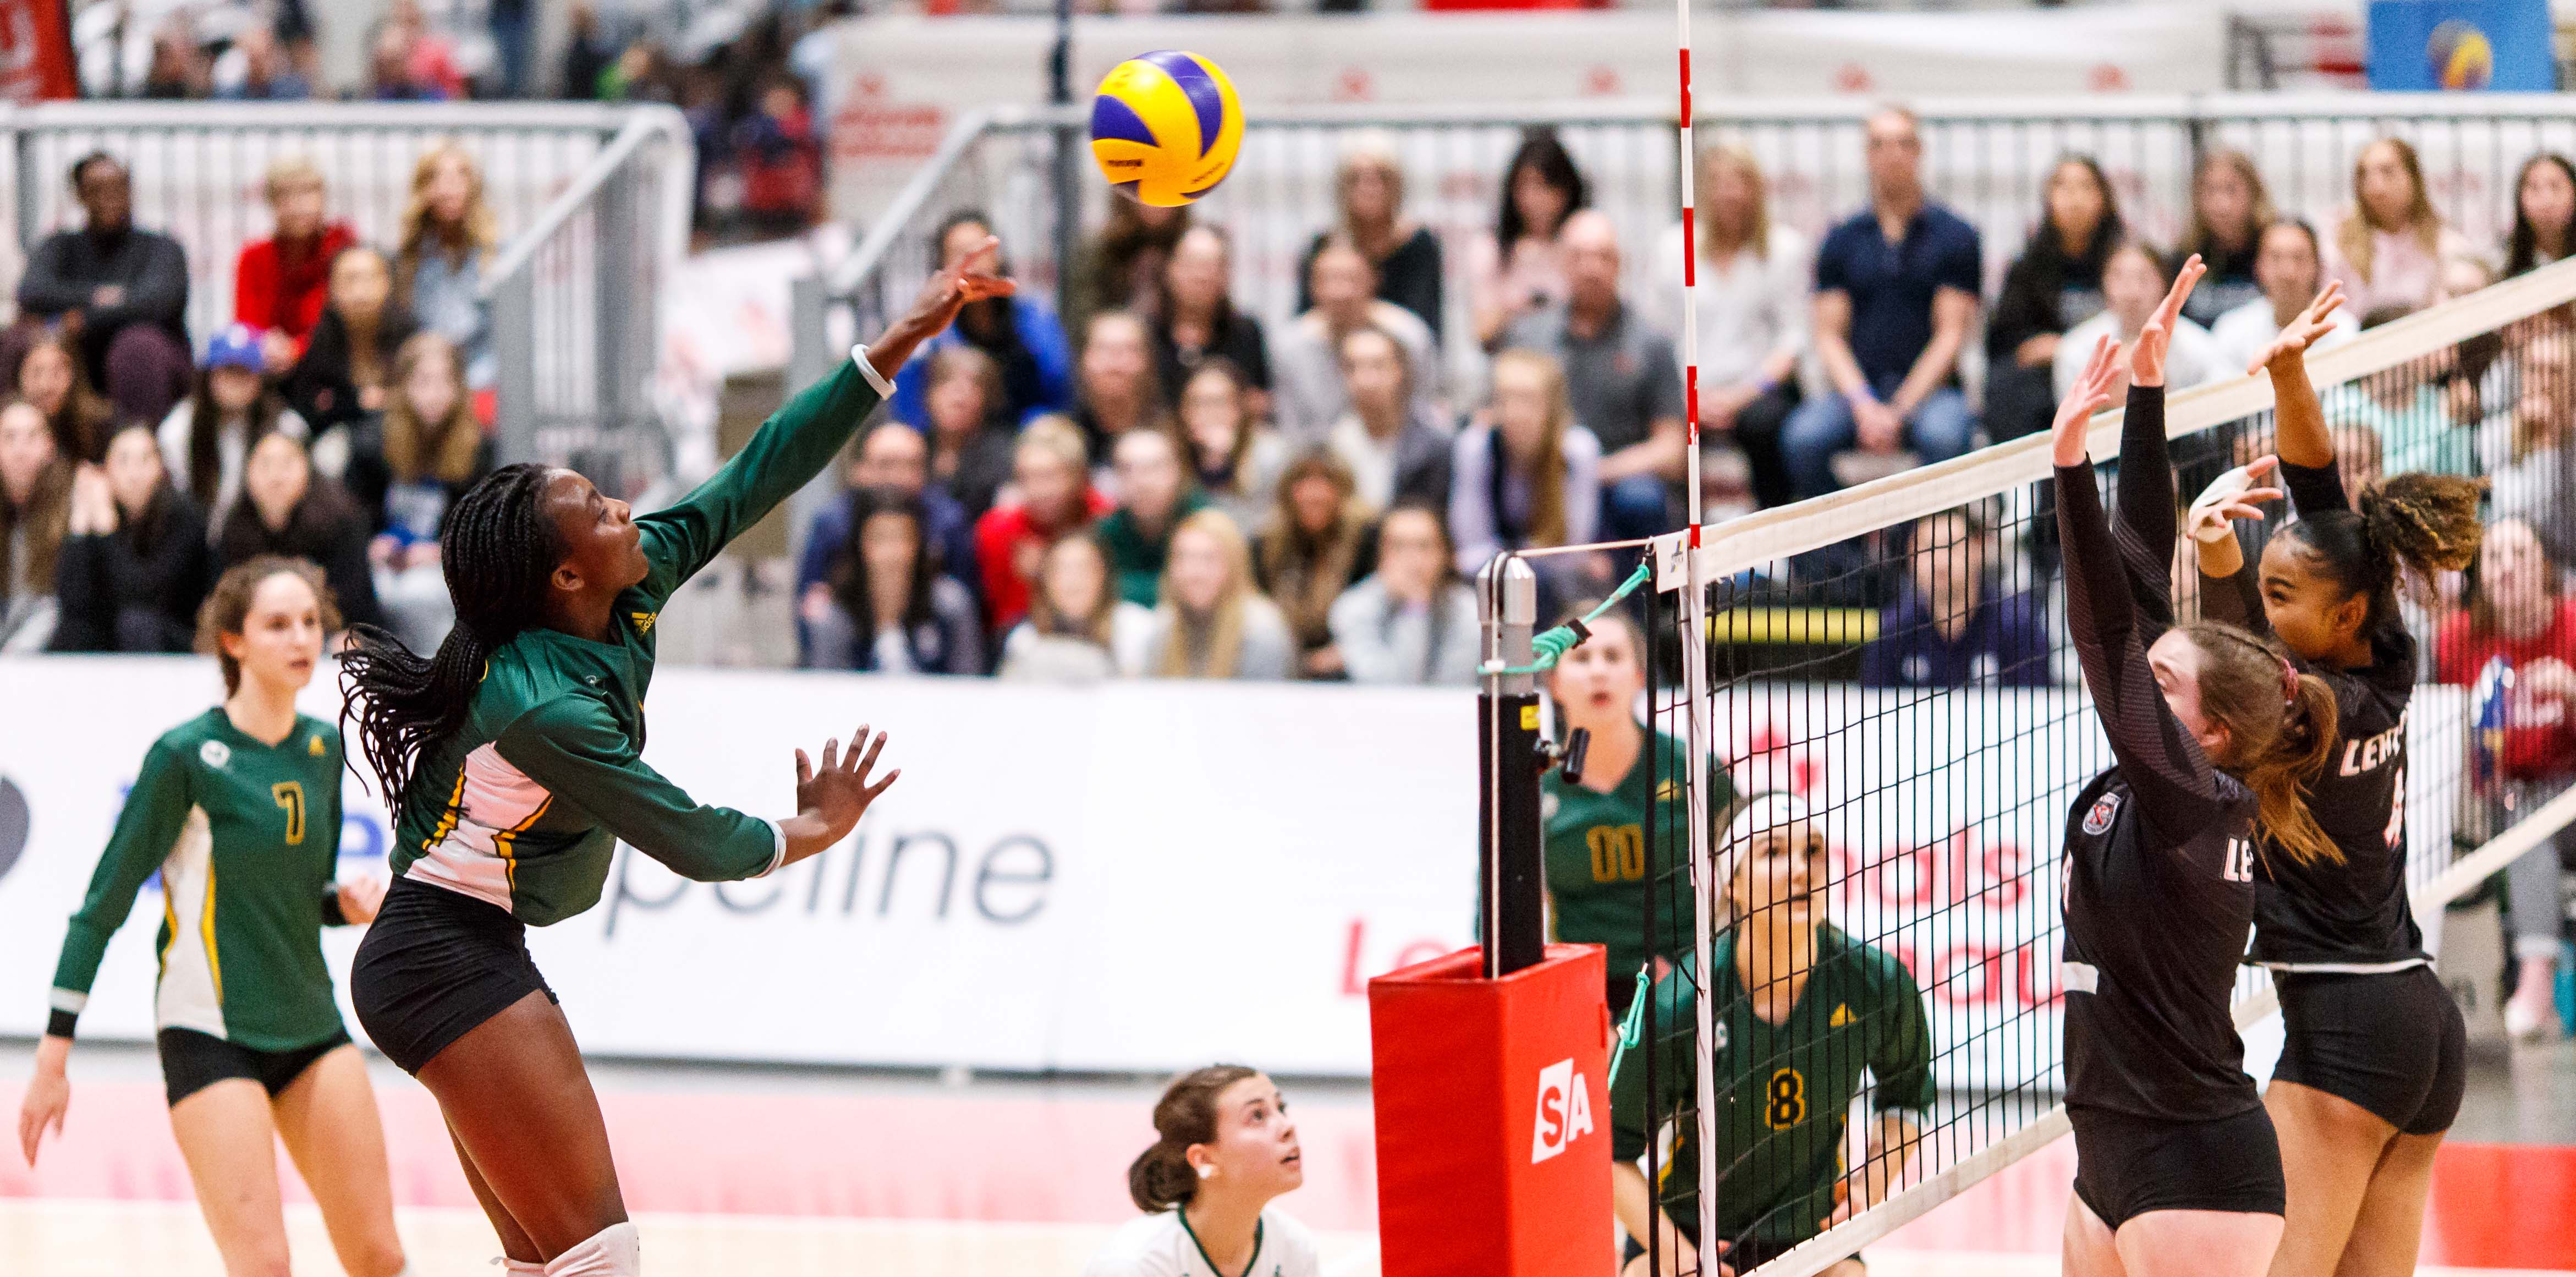 Volleyball Canada announces that Edmonton will again host “Super